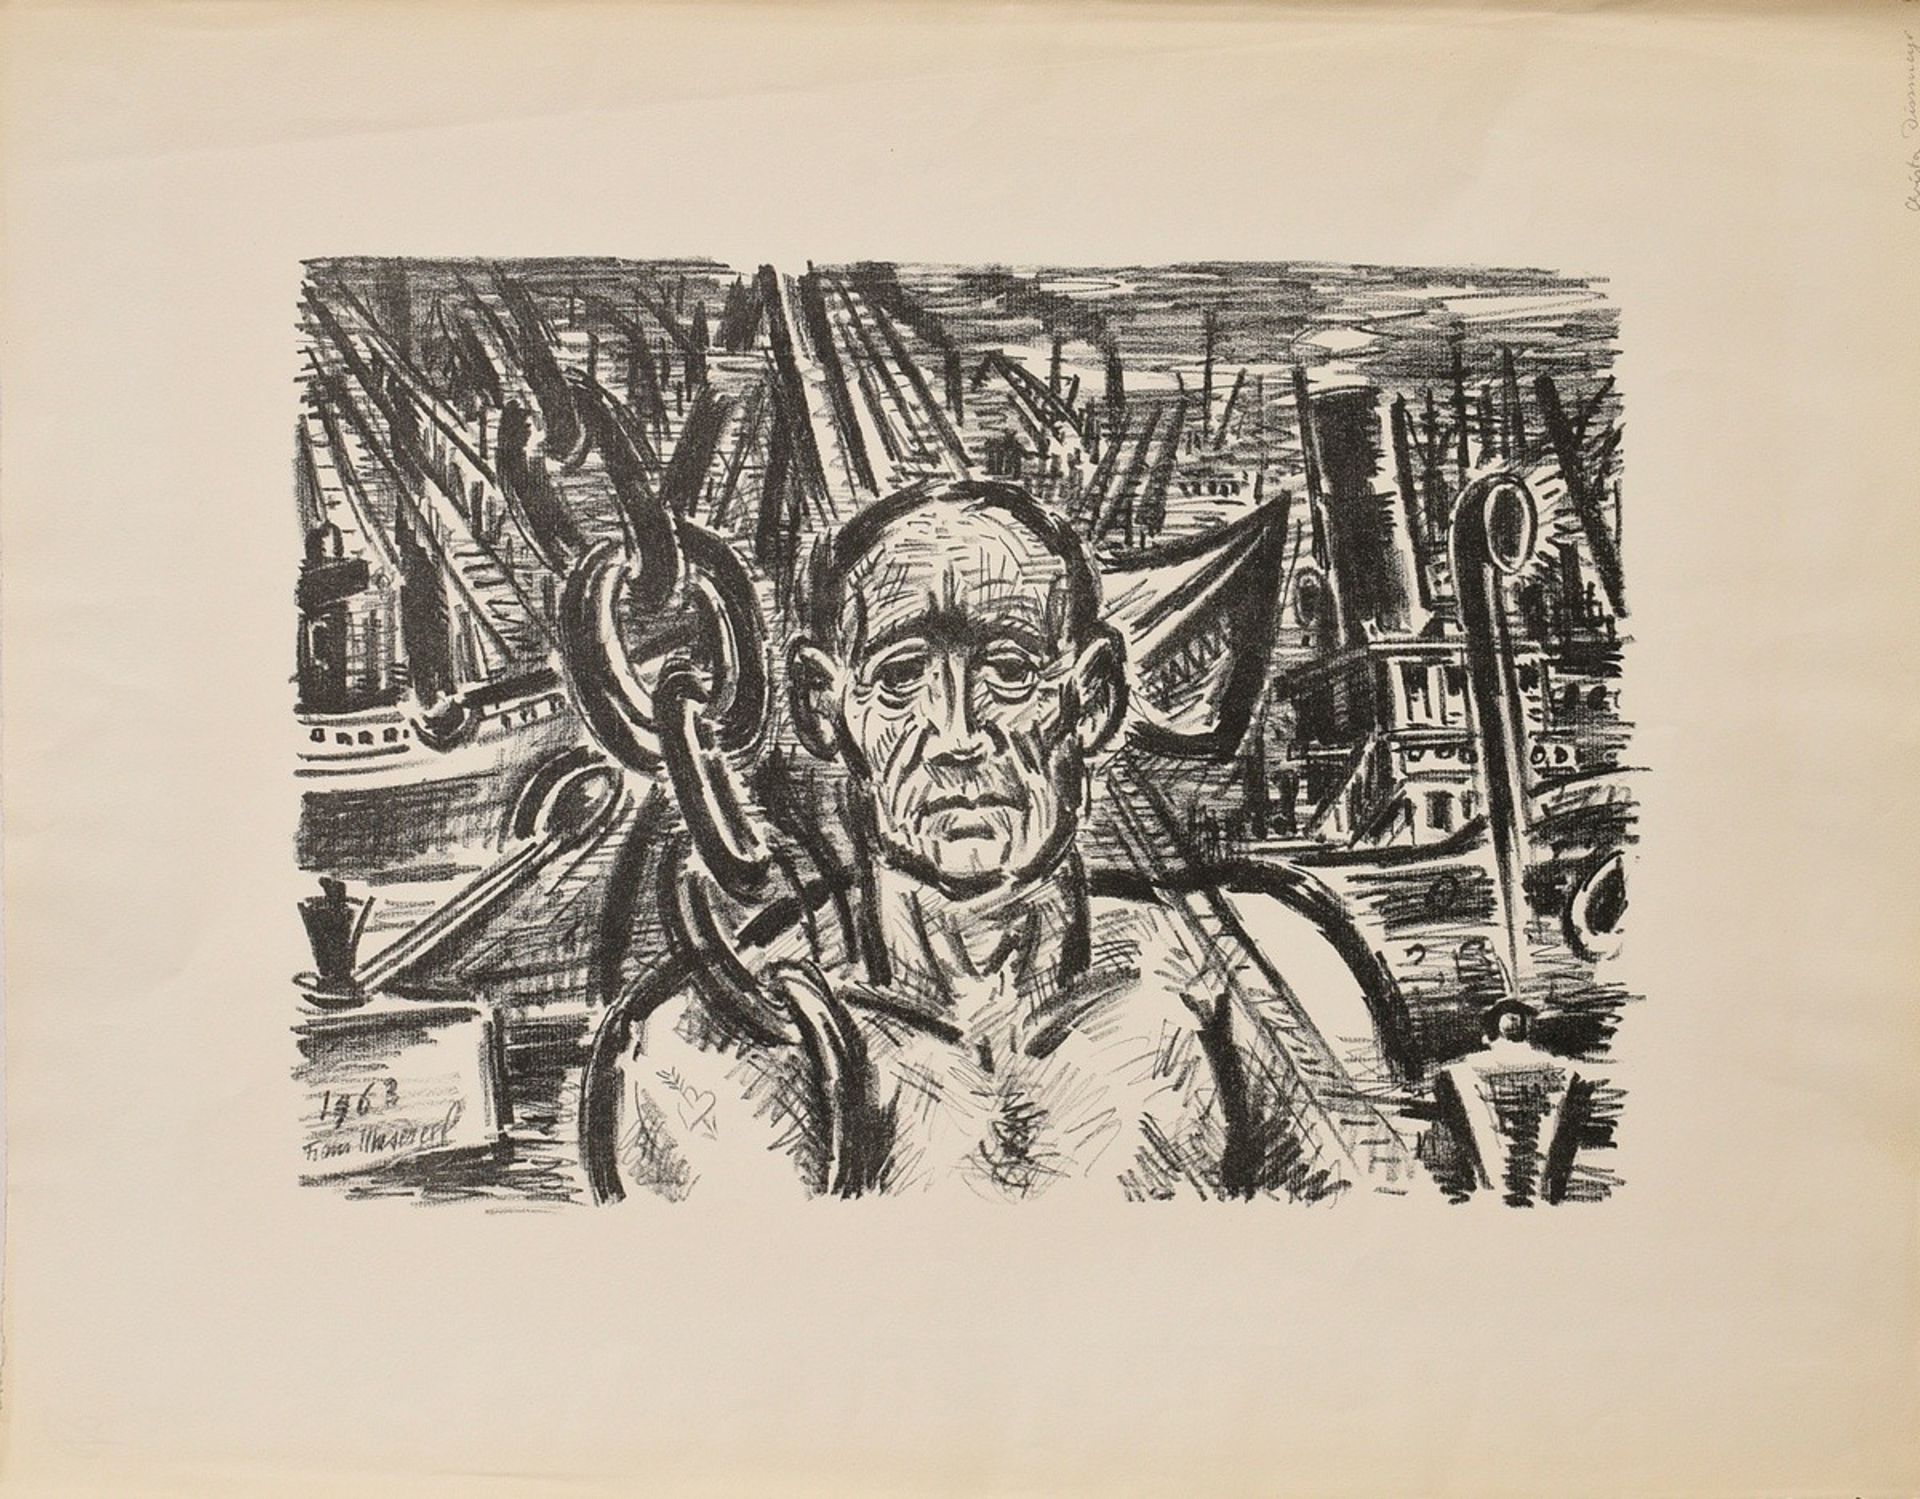 Masareel, Frans (1889-1972) 'Sailor' 1963, lithograph, sign./dat. in stone, Griffelkunst, PM 30.5x4 - Image 2 of 3